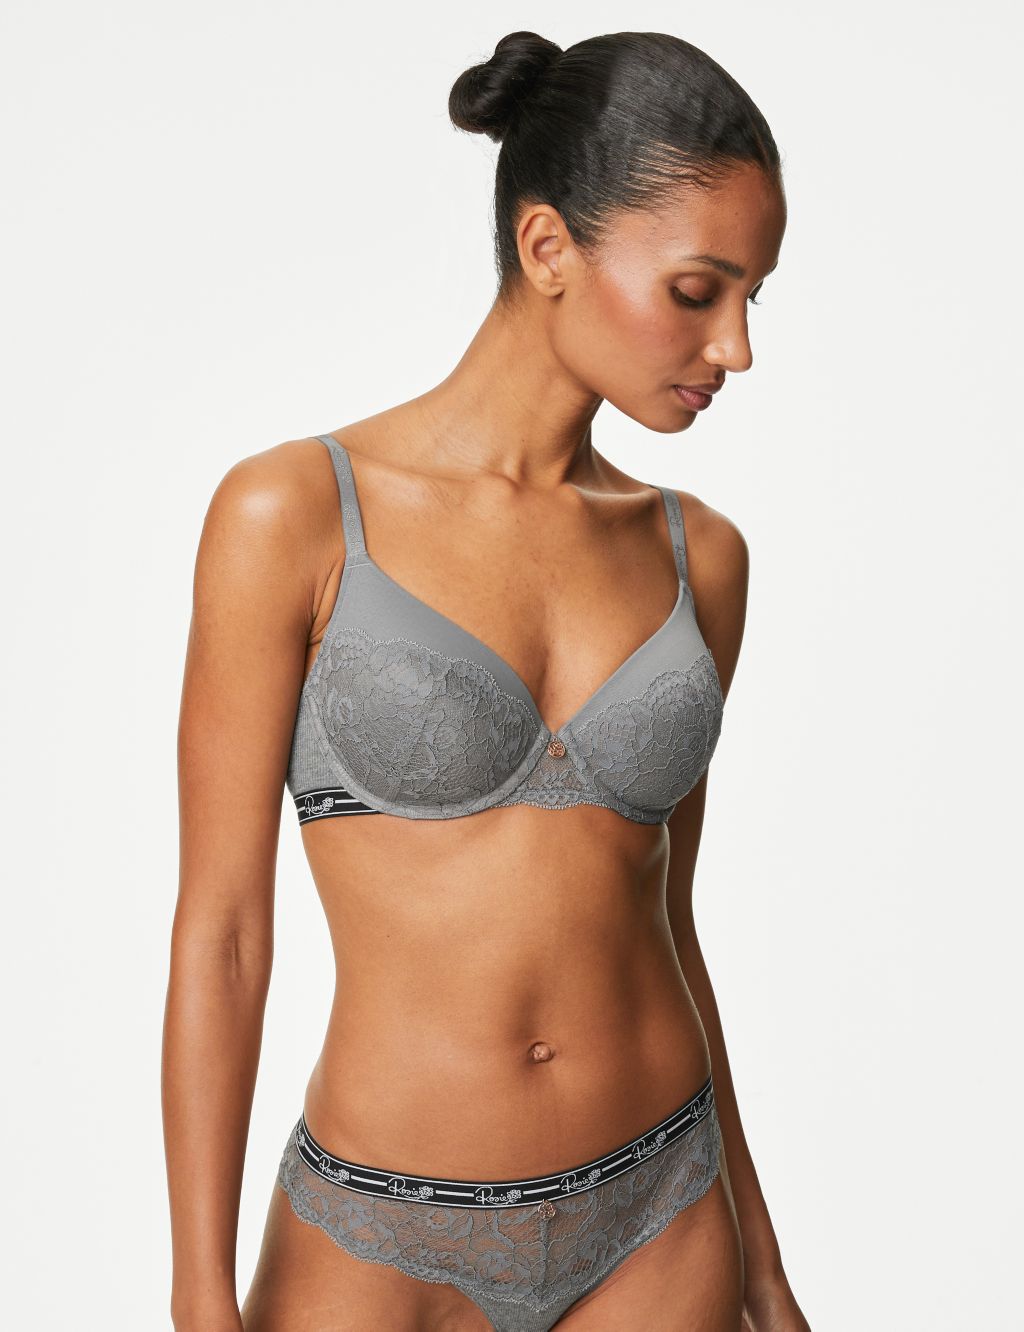 Ribbed & Lace Wired Full Cup Bra A-E image 1